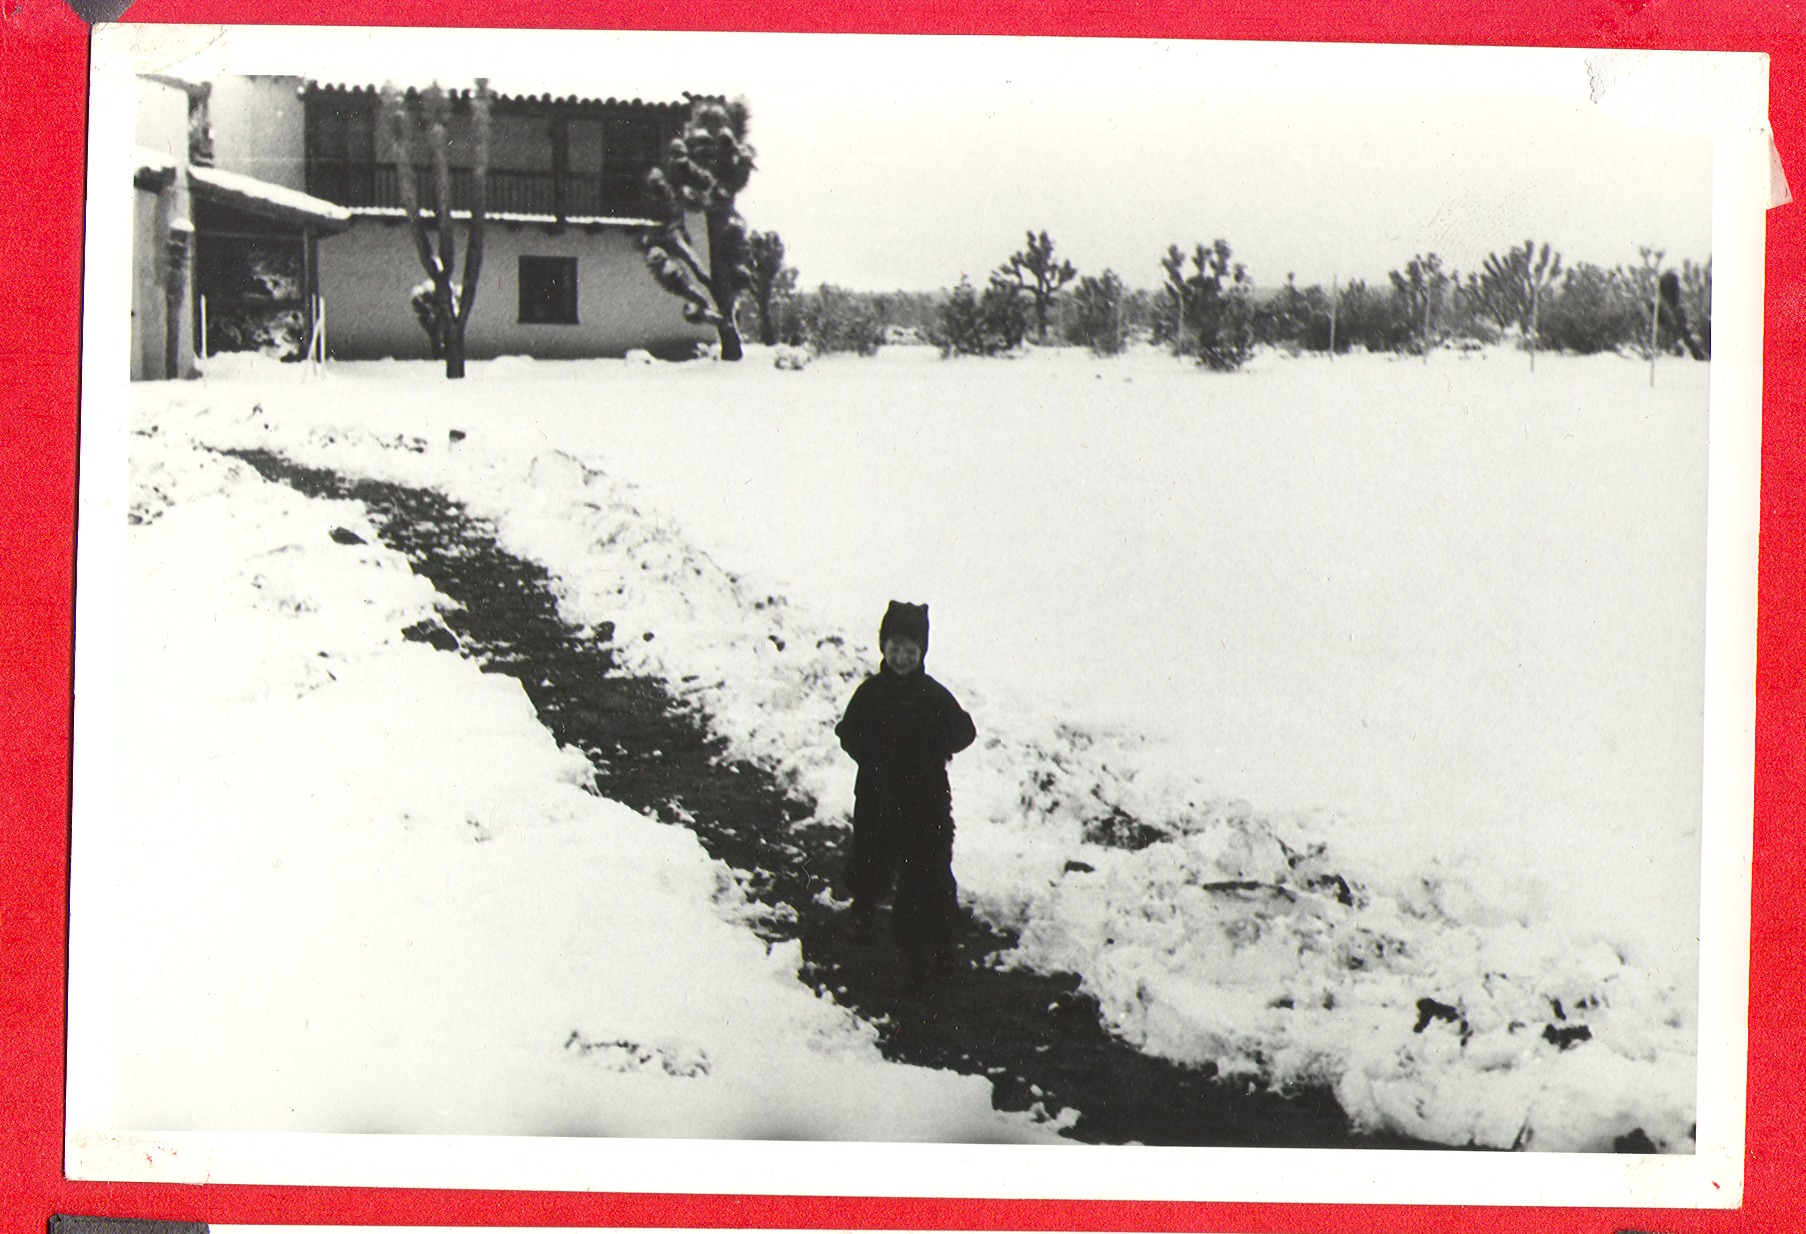 Rex Bell Jr. outside the ranch house in the snow: photographic print